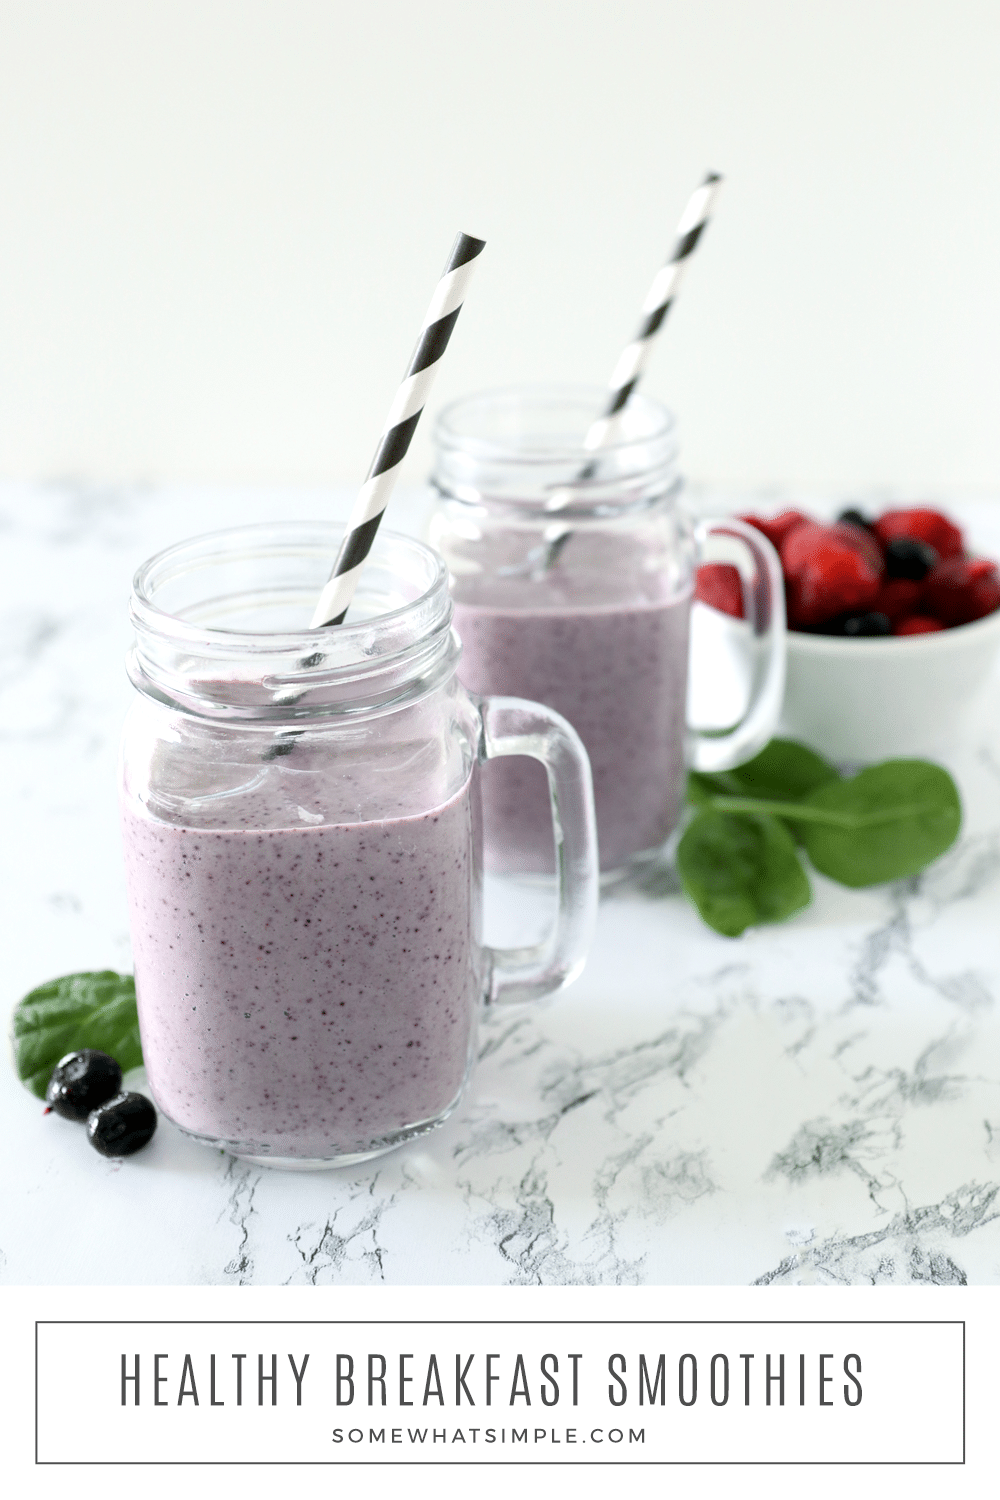 Breakfast Smoothies are healthy breakfast options that are perfect to enjoy on busy mornings. They are deliciously filling and so simple to make! via @somewhatsimple